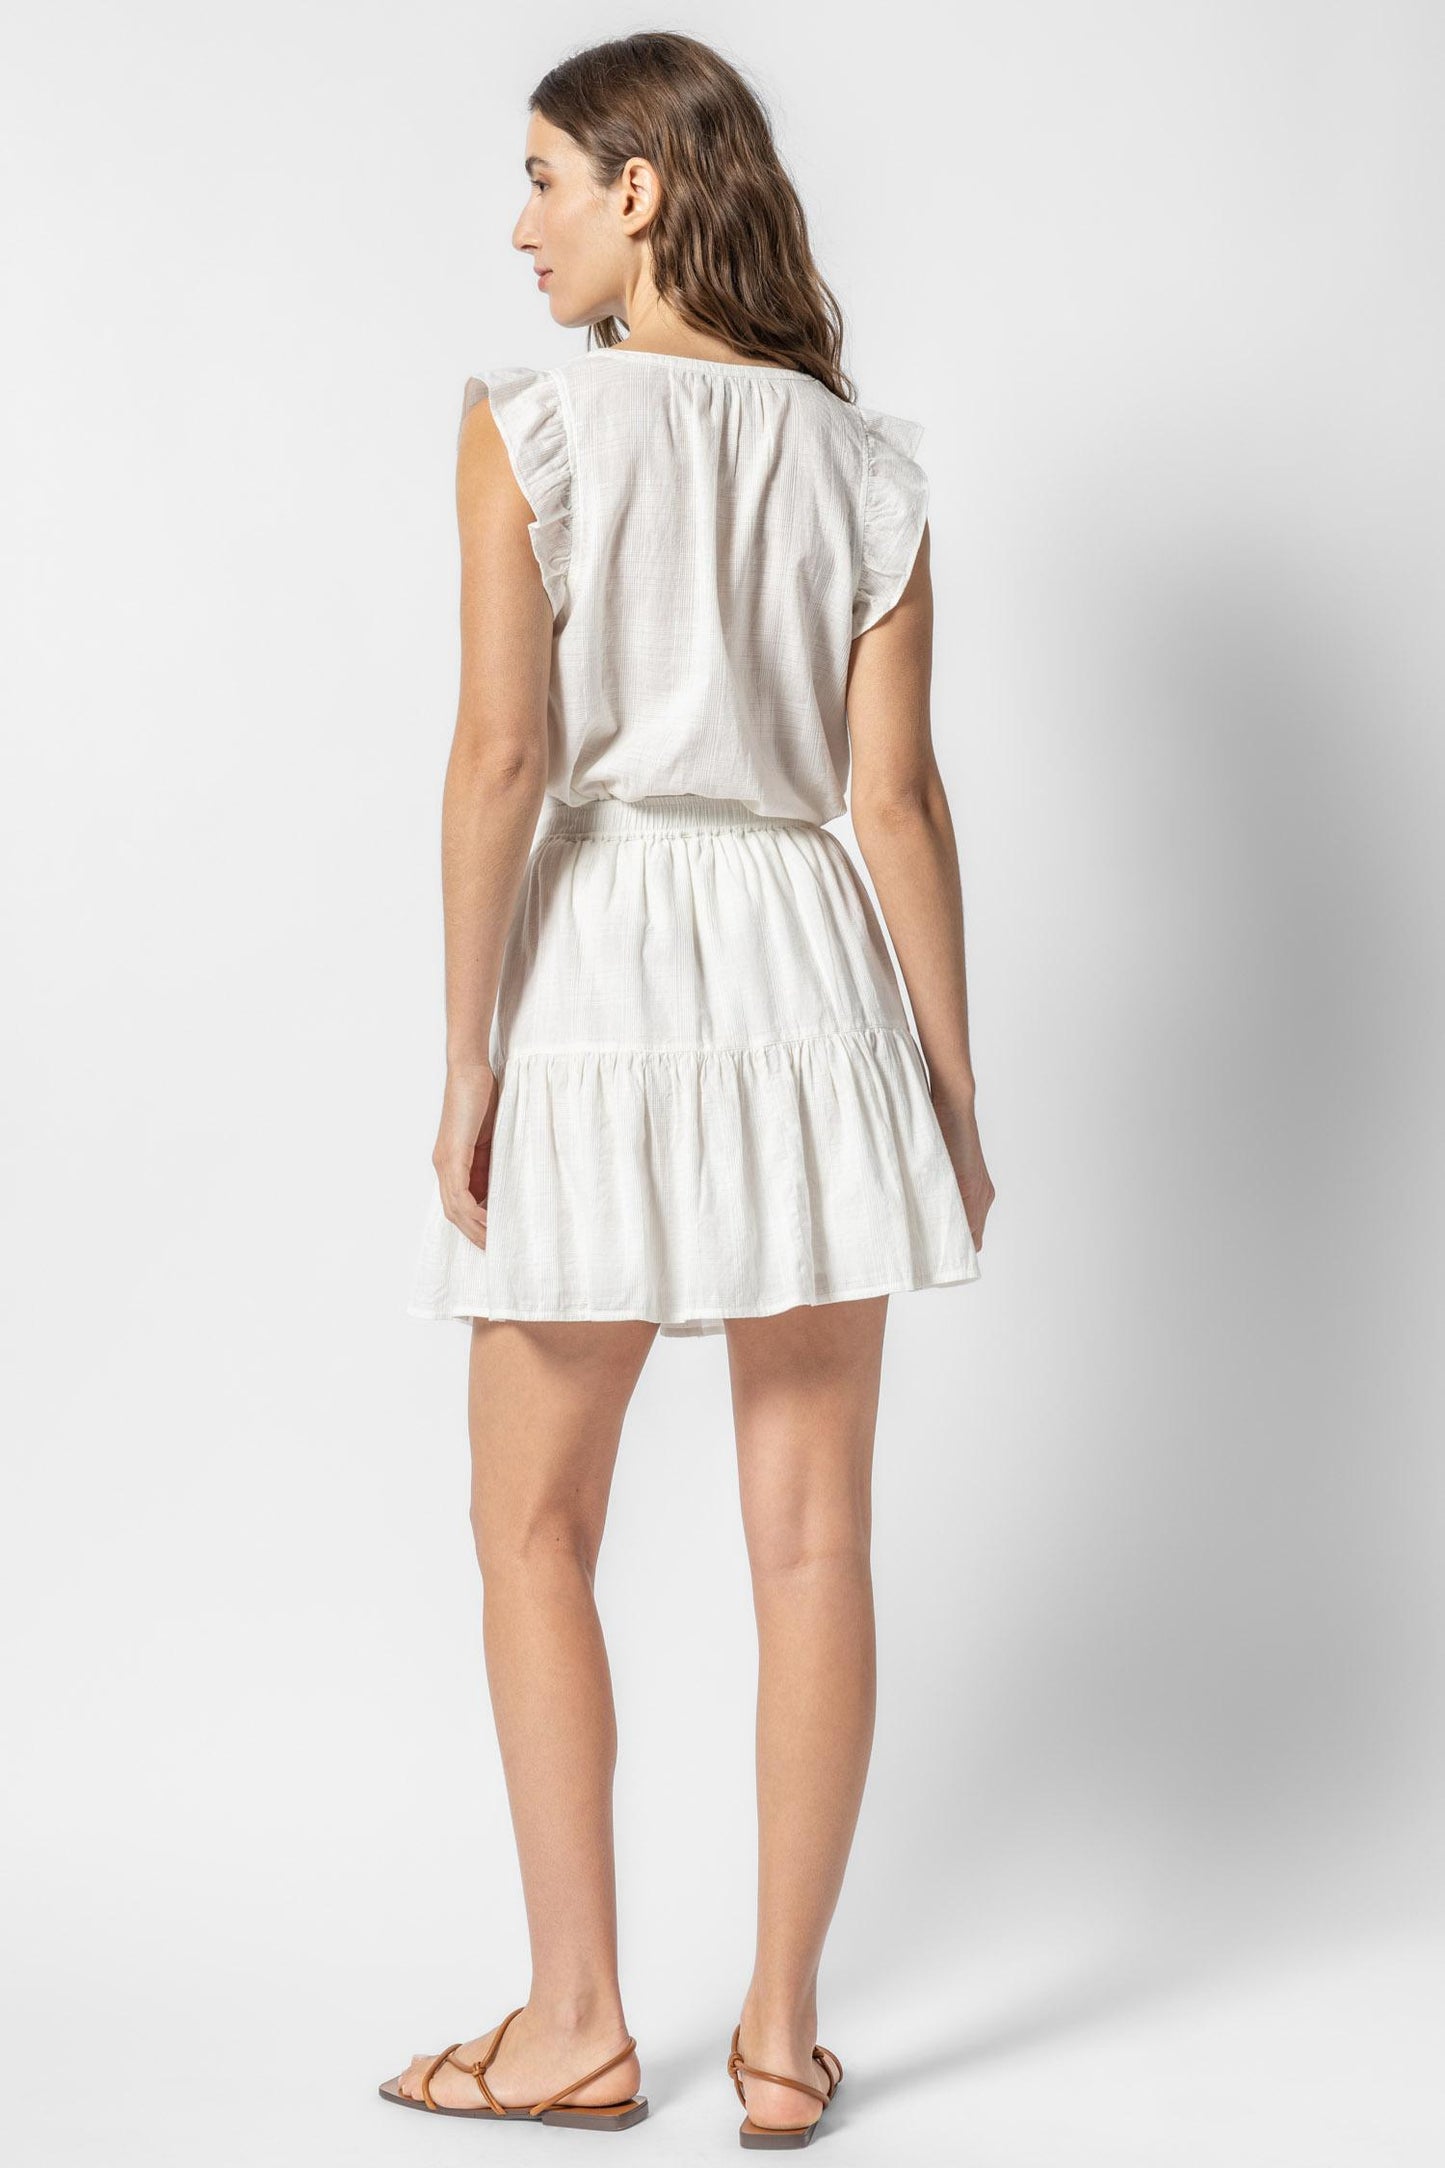 Tiered Short Skirt in white by Lilla P